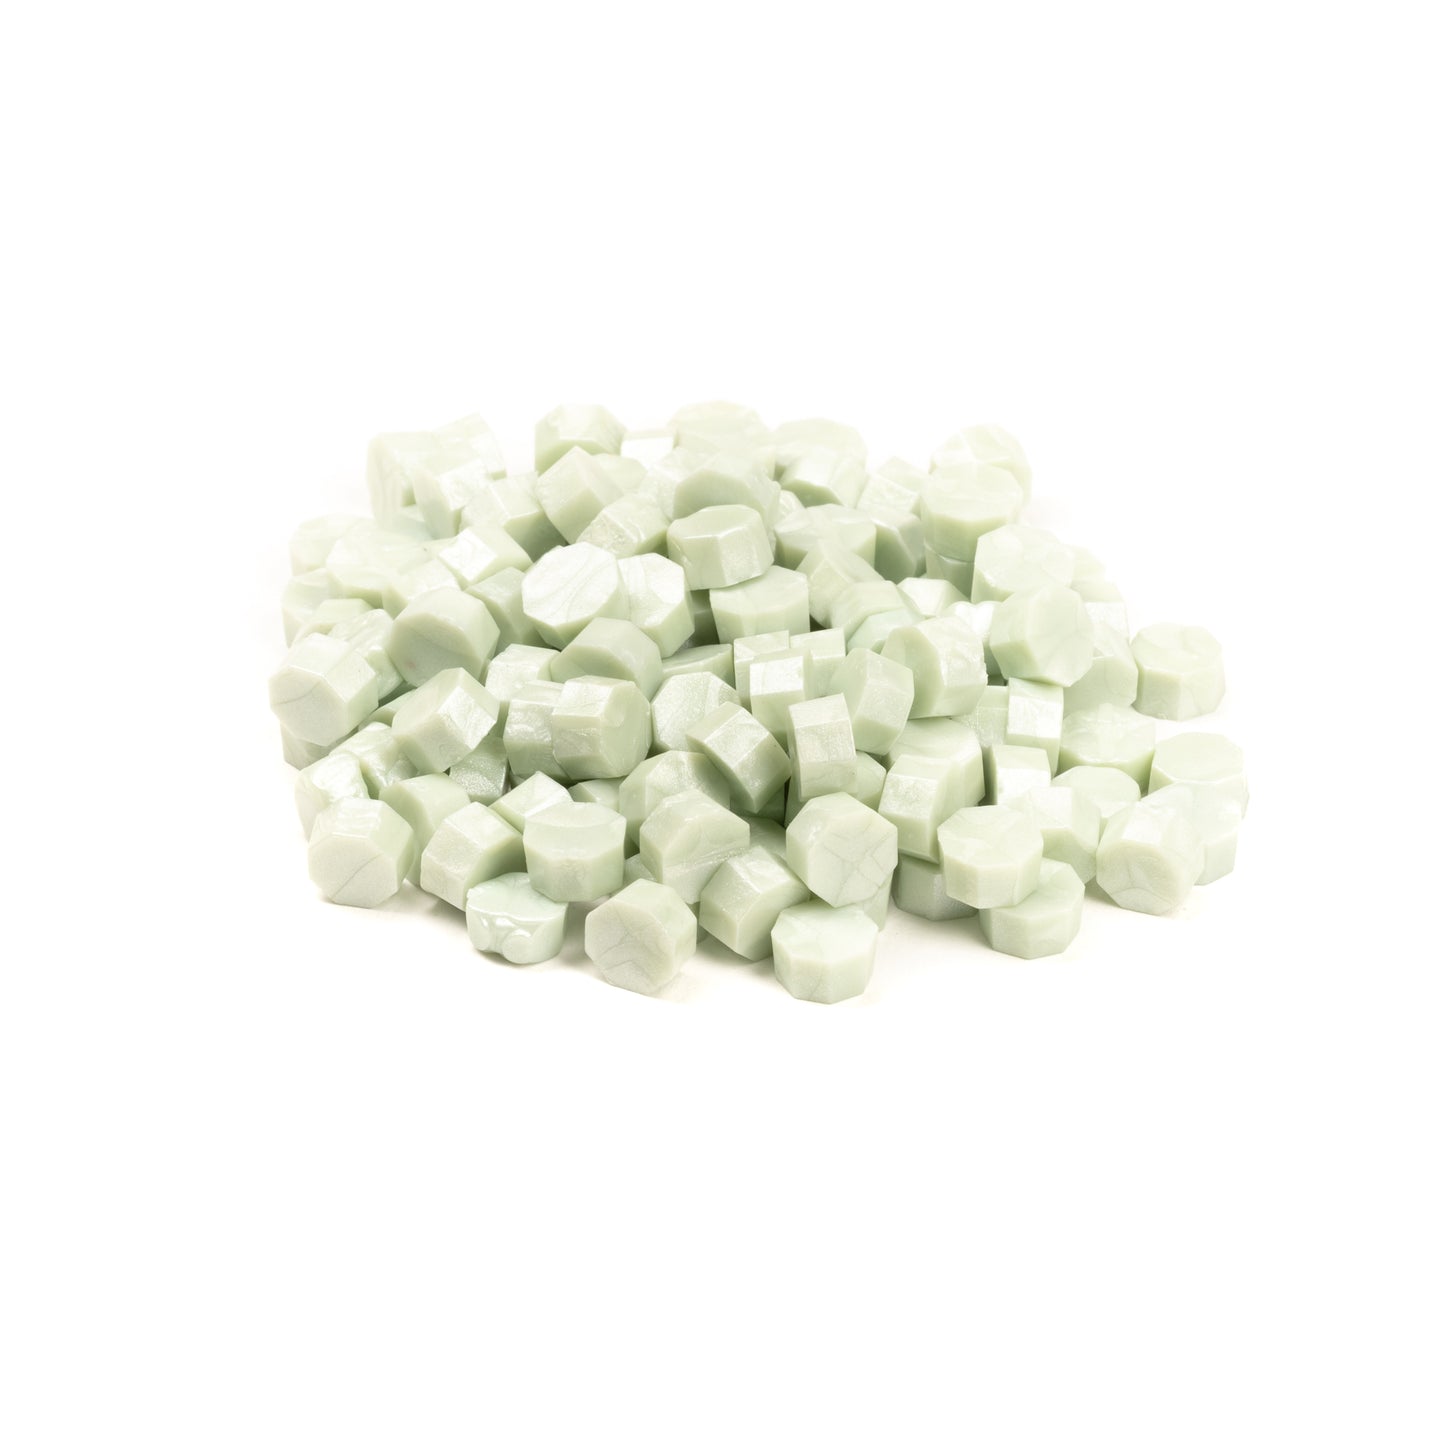 Spring Wax Beads (Imperfect, Discontinued)